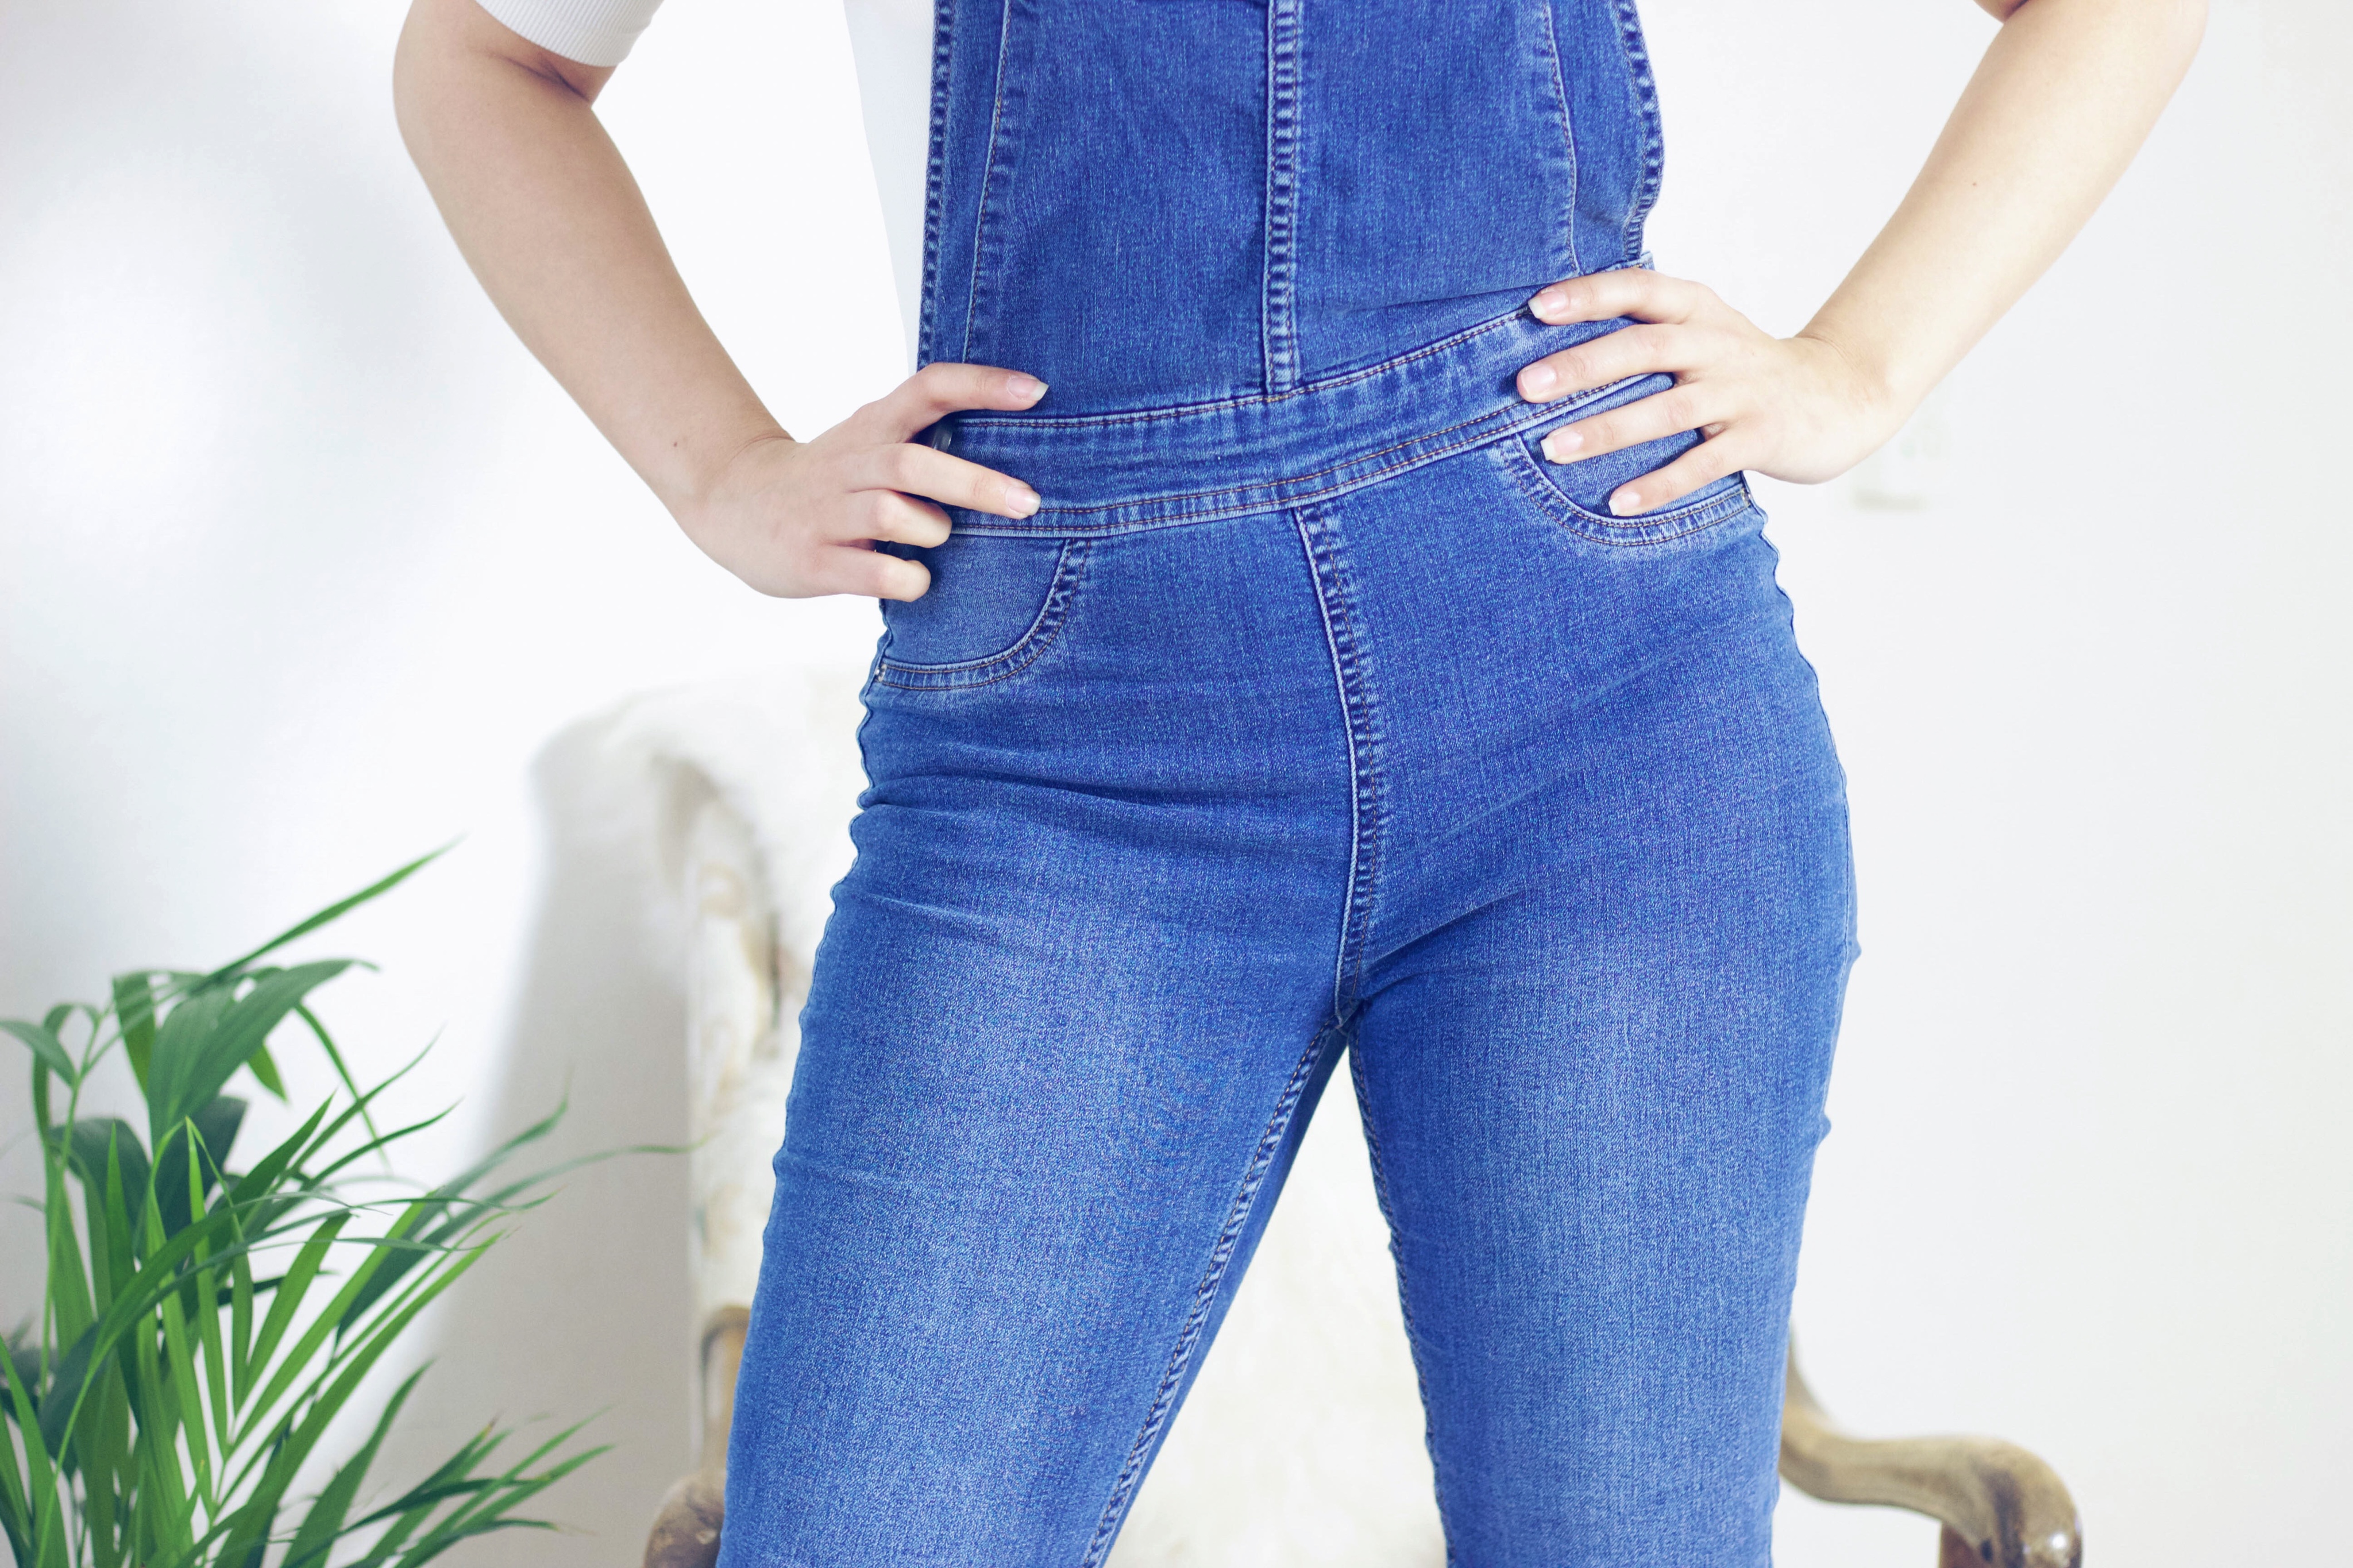 H&M dungarees